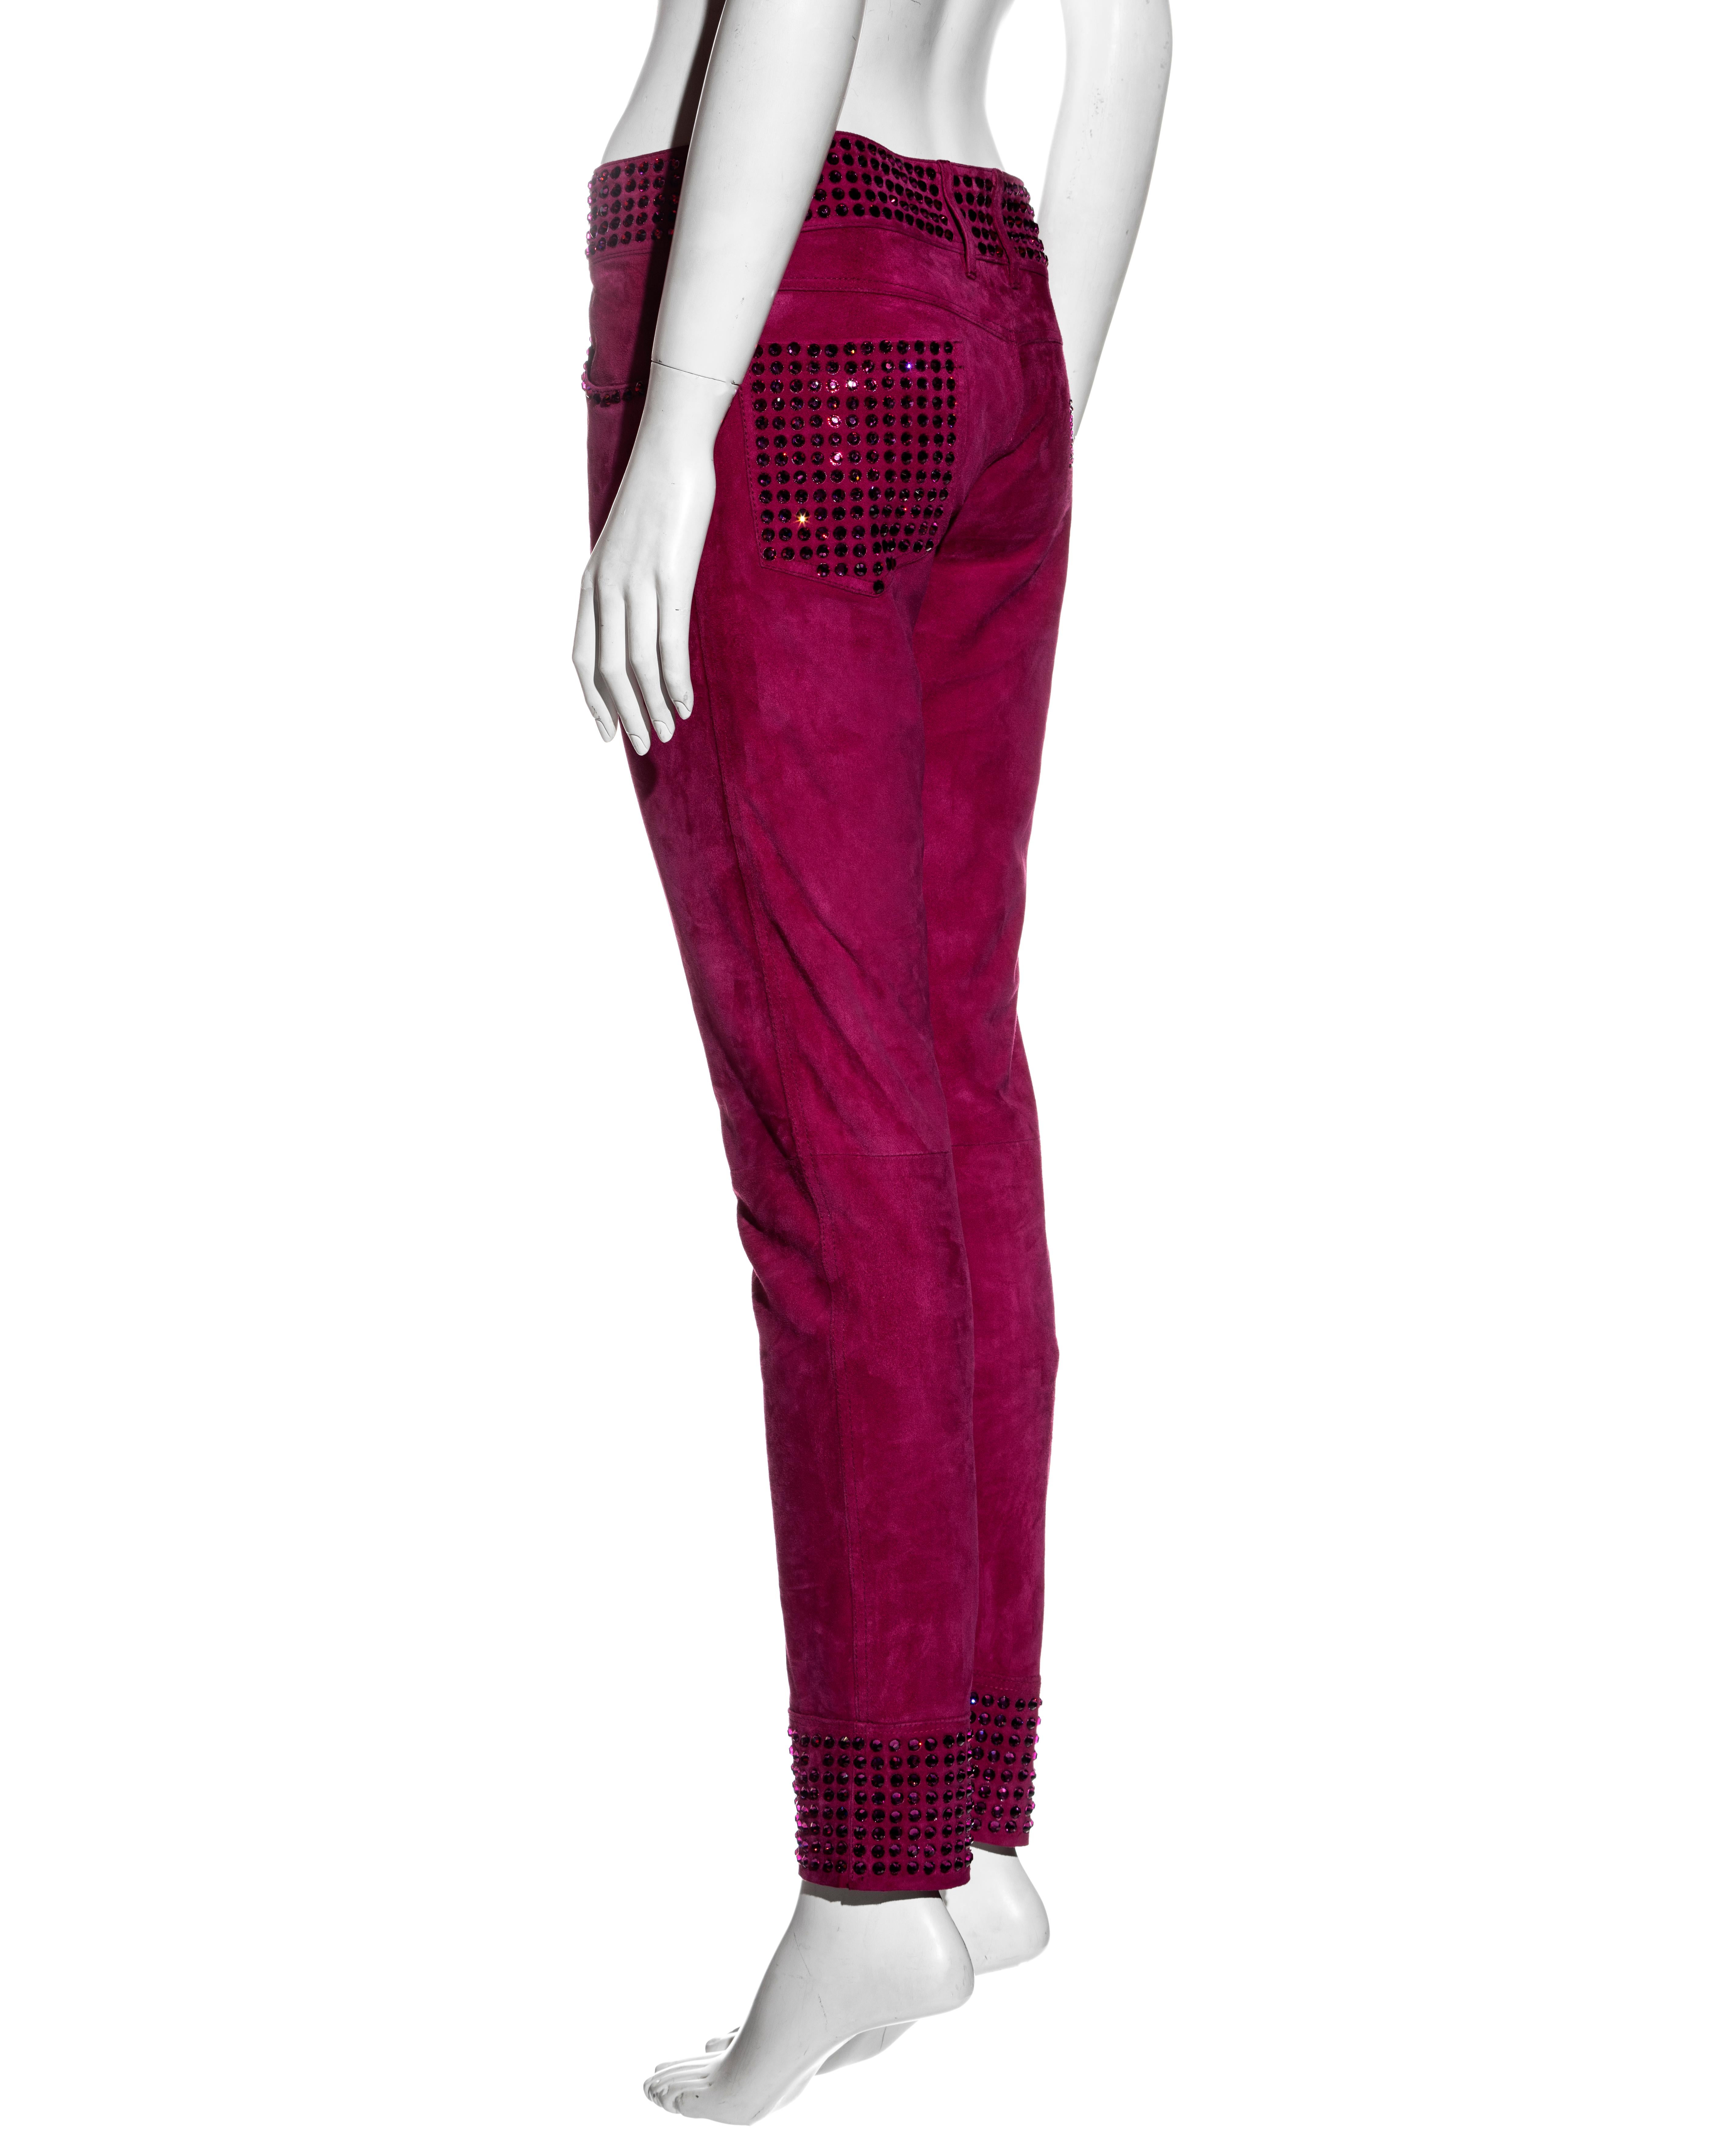 D&G by Dolce & Gabbana pink suede pants with crystals, c. 1998-1999 2